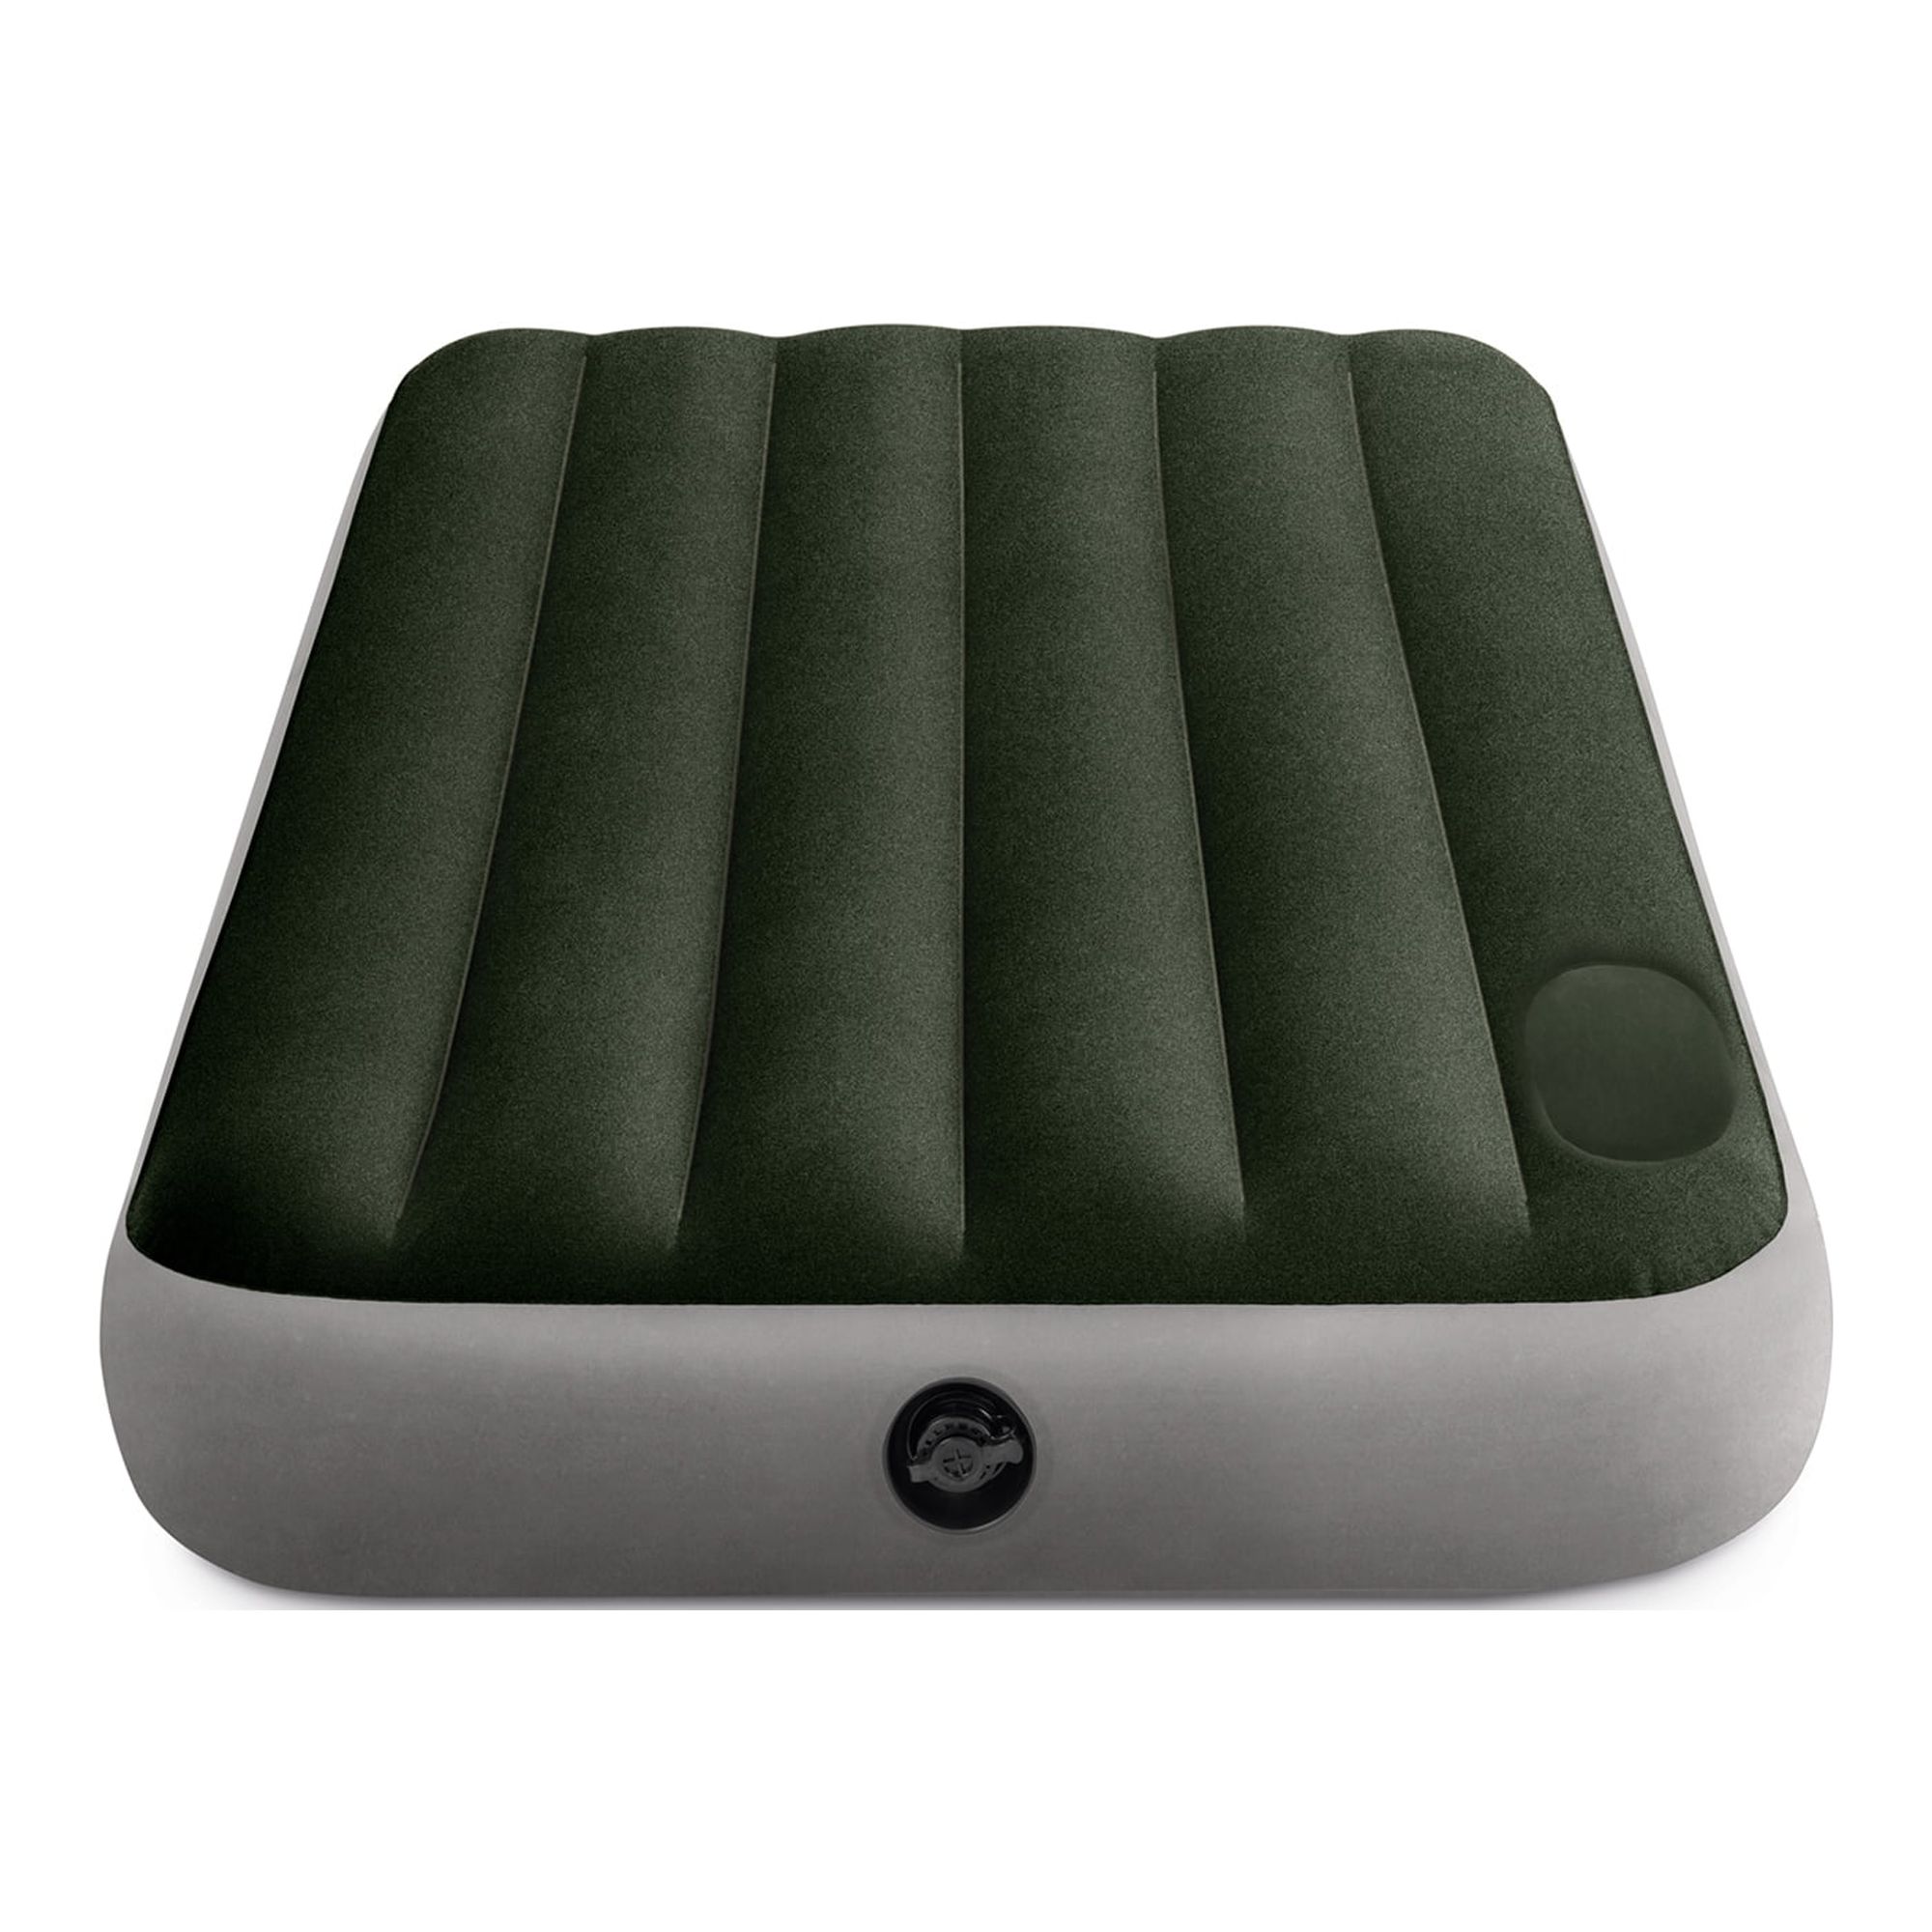 Intex Dura-Beam Standard Series Downy Airbed with Built-In Foot Pump, Twin Size - image 1 of 9